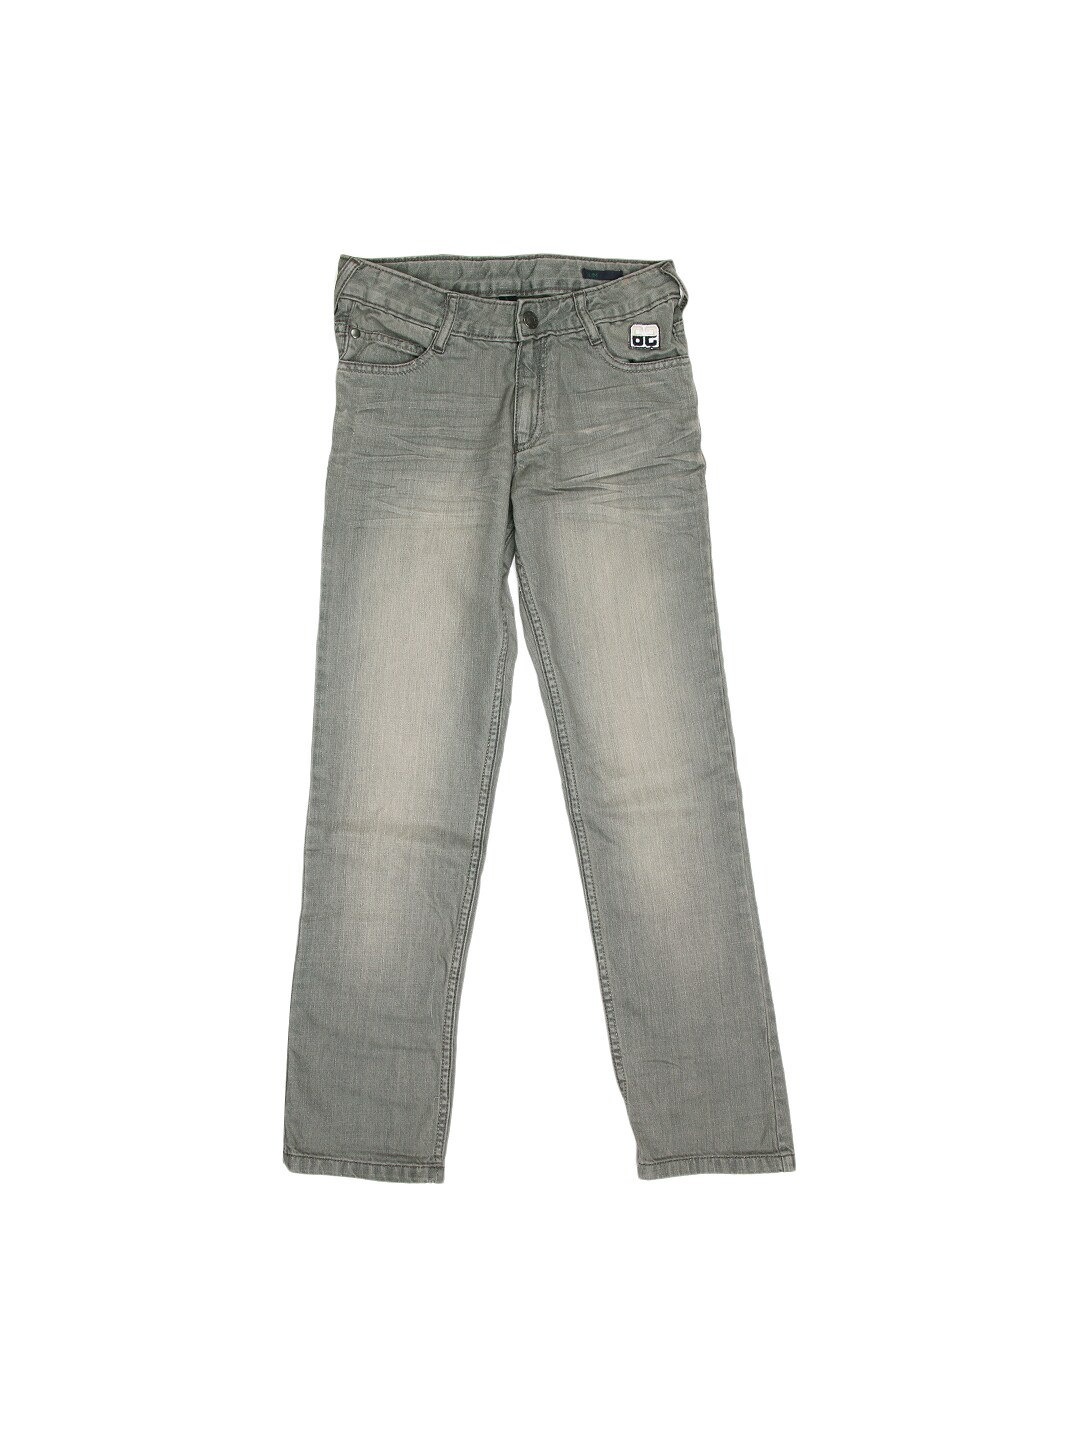 United Colors of Benetton Boys Grey Slim Fit Jeans